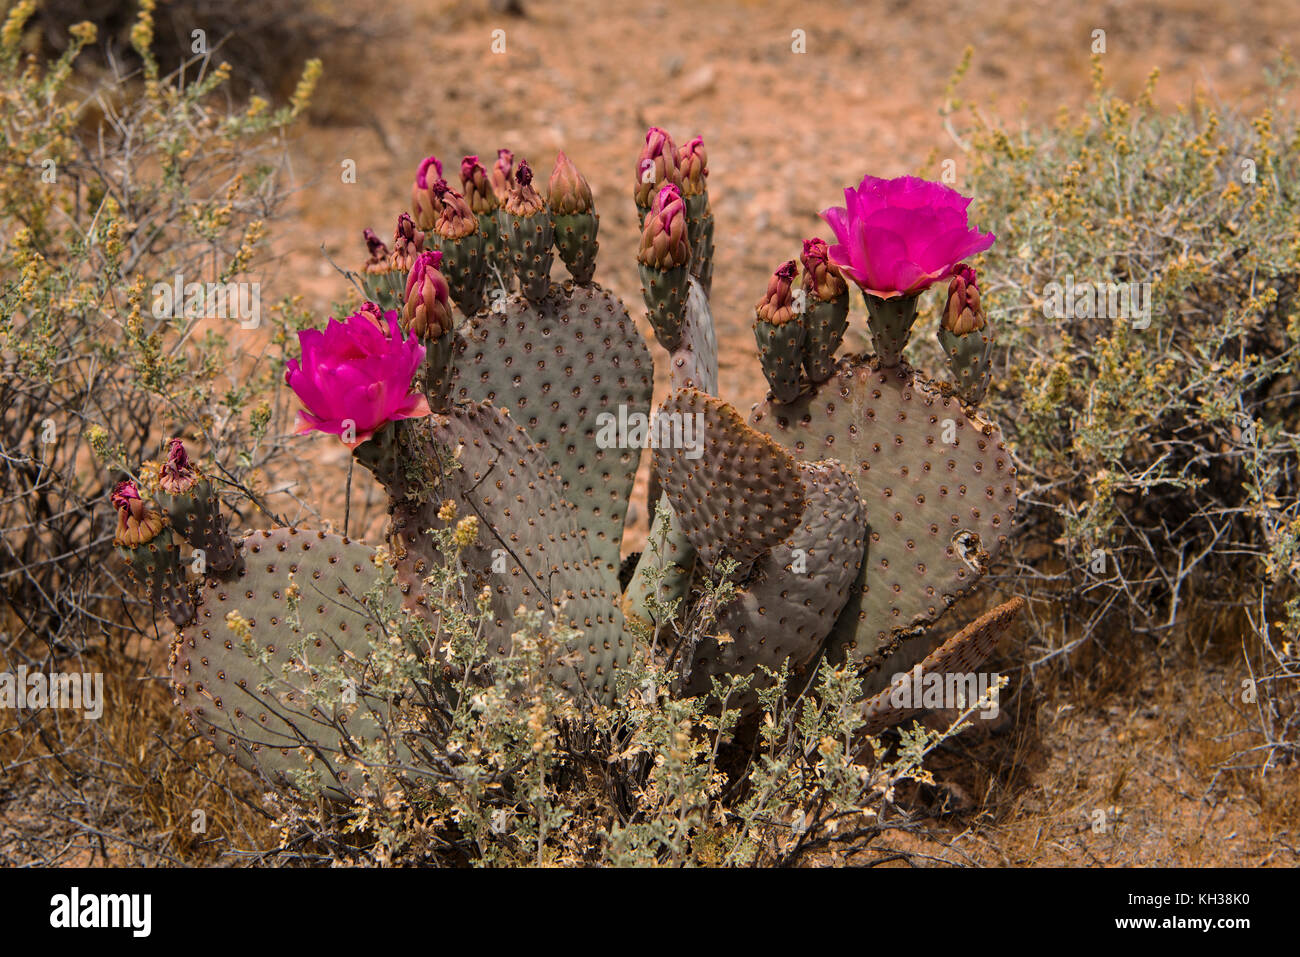 Magenta colored flowers on a cactus in the desert near the Valley of Fire in Nevada, USA Stock Photo